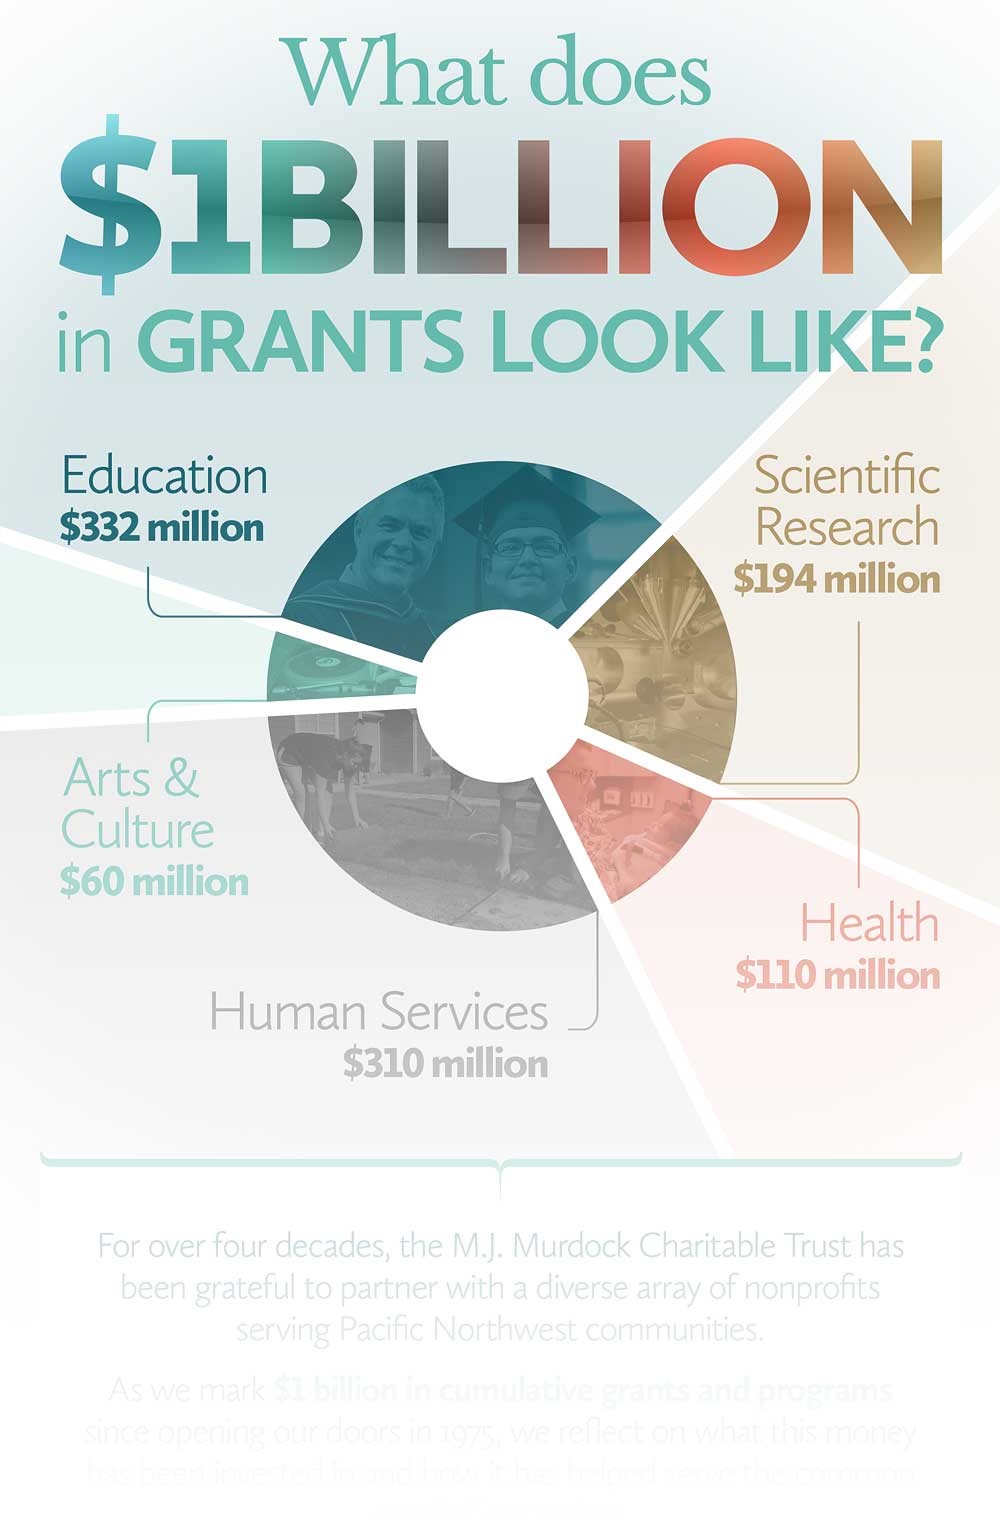 A diagram with text that says "What does $1 billion in grants look like? Education: $332 million. Arts and Culture: $60 million. Human Services: $310 million. Scientific Research: $194 million. Health: $110 million." 